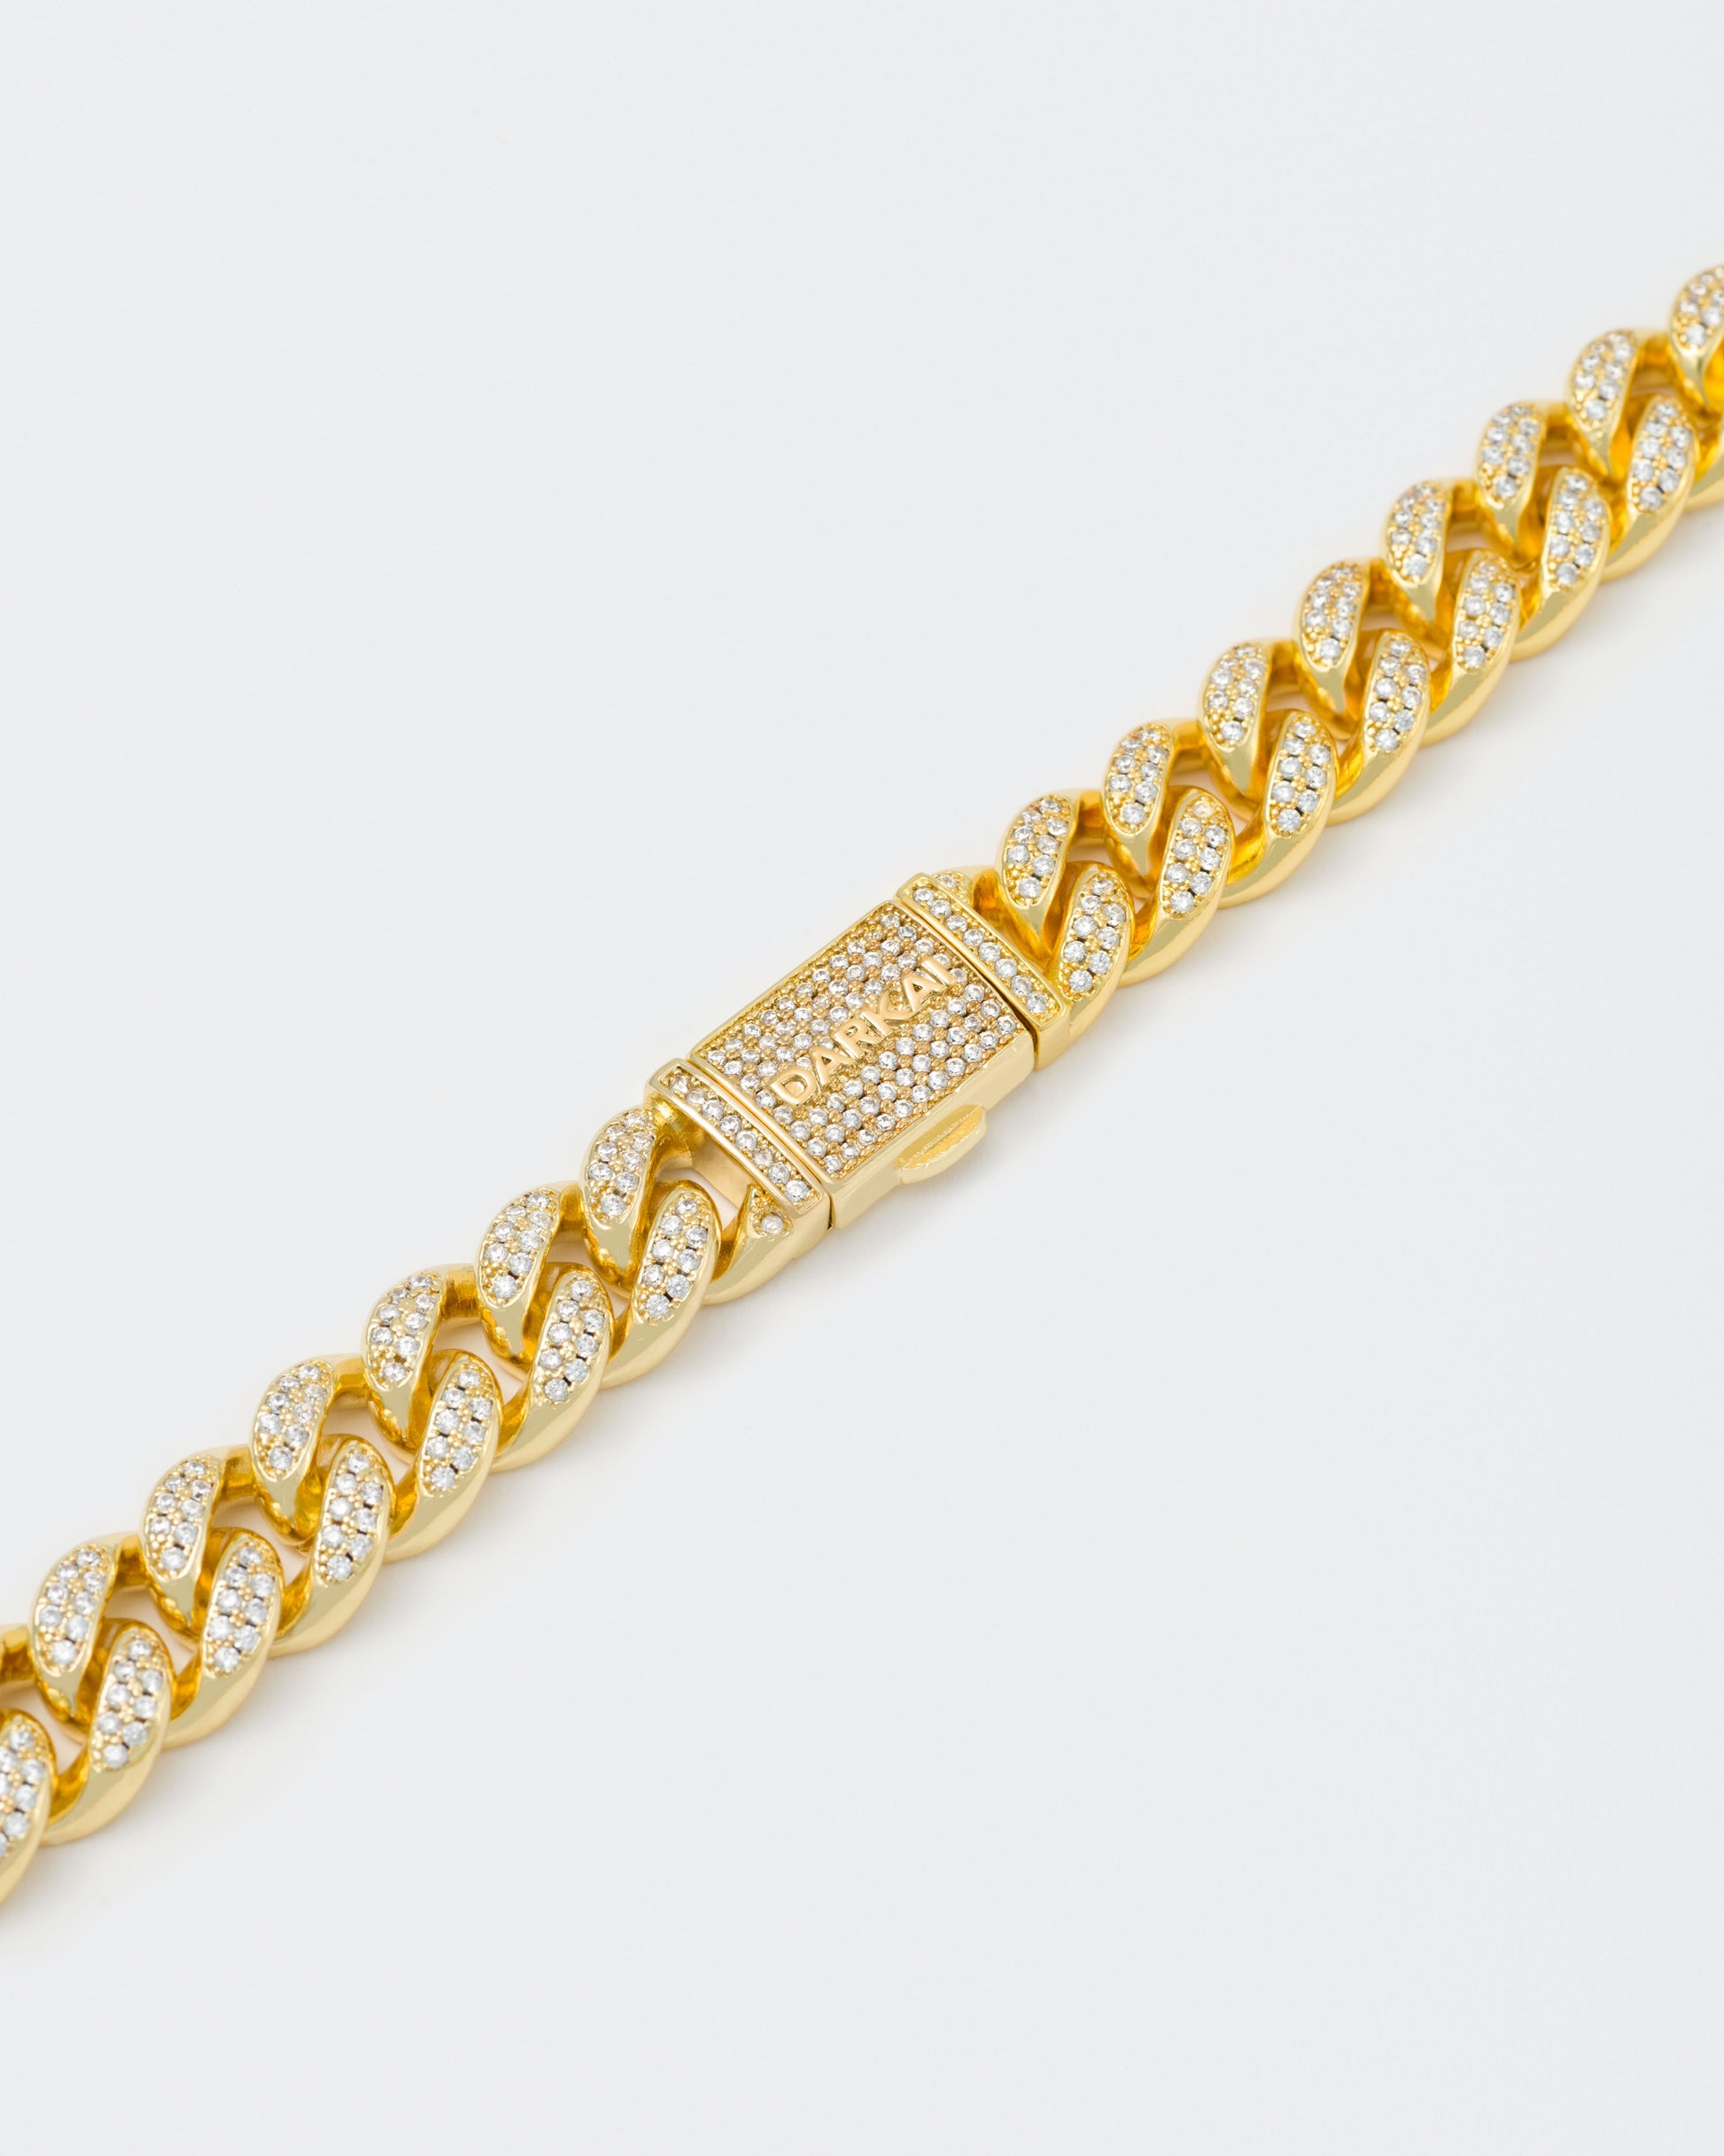 detail of 18k yellow gold coated cuban chain necklace with hand-set micropavé stones in white